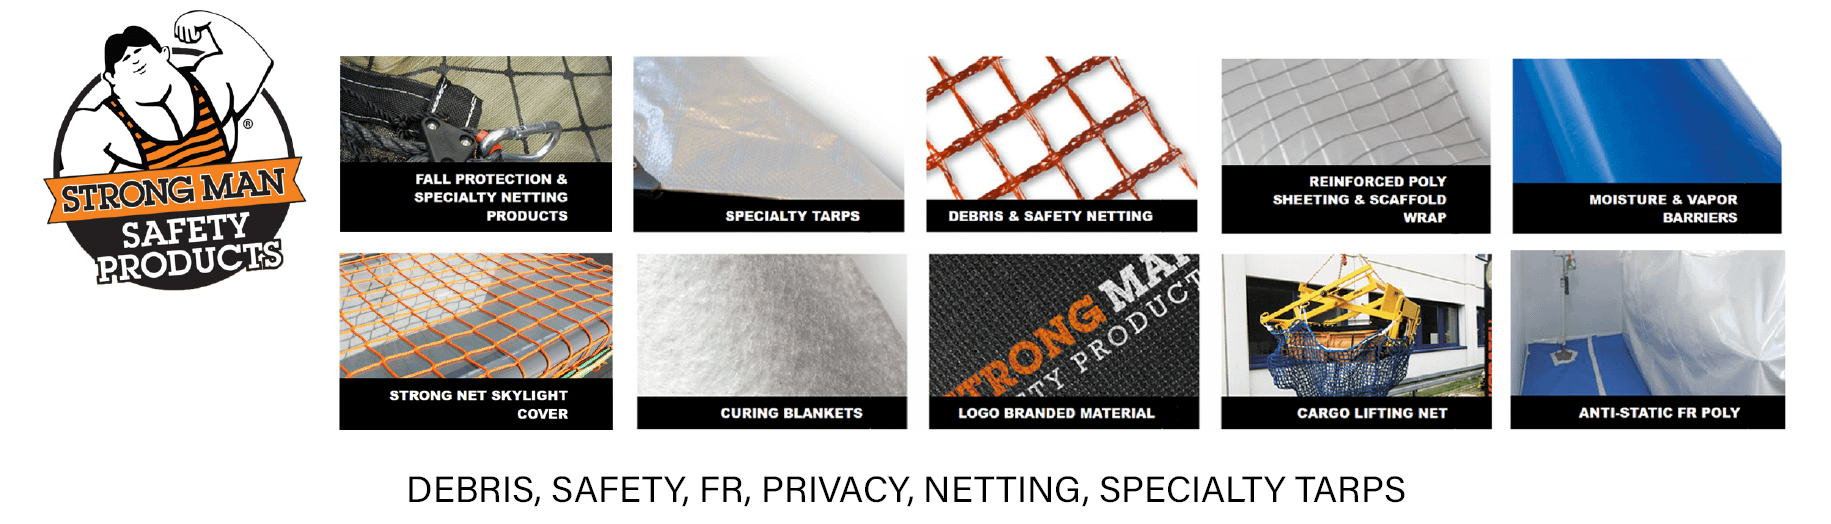 NACH Marketing - Strong Man Safety Products - Debris, Safety, FR, Privacy, Netting, Specialty Tarps